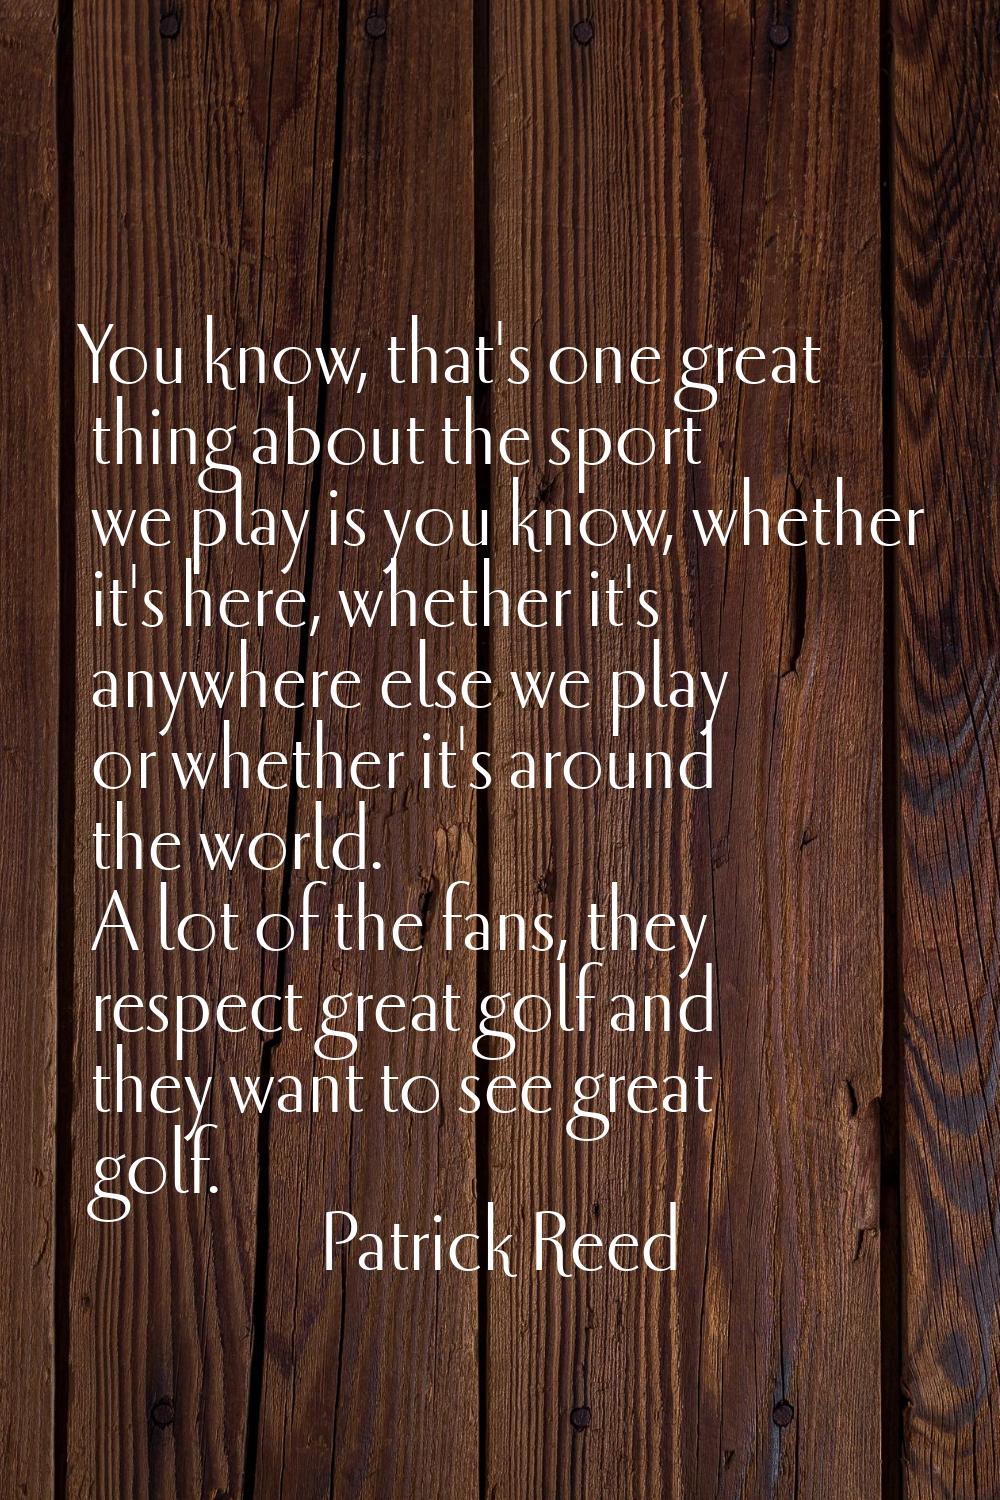 You know, that's one great thing about the sport we play is you know, whether it's here, whether it